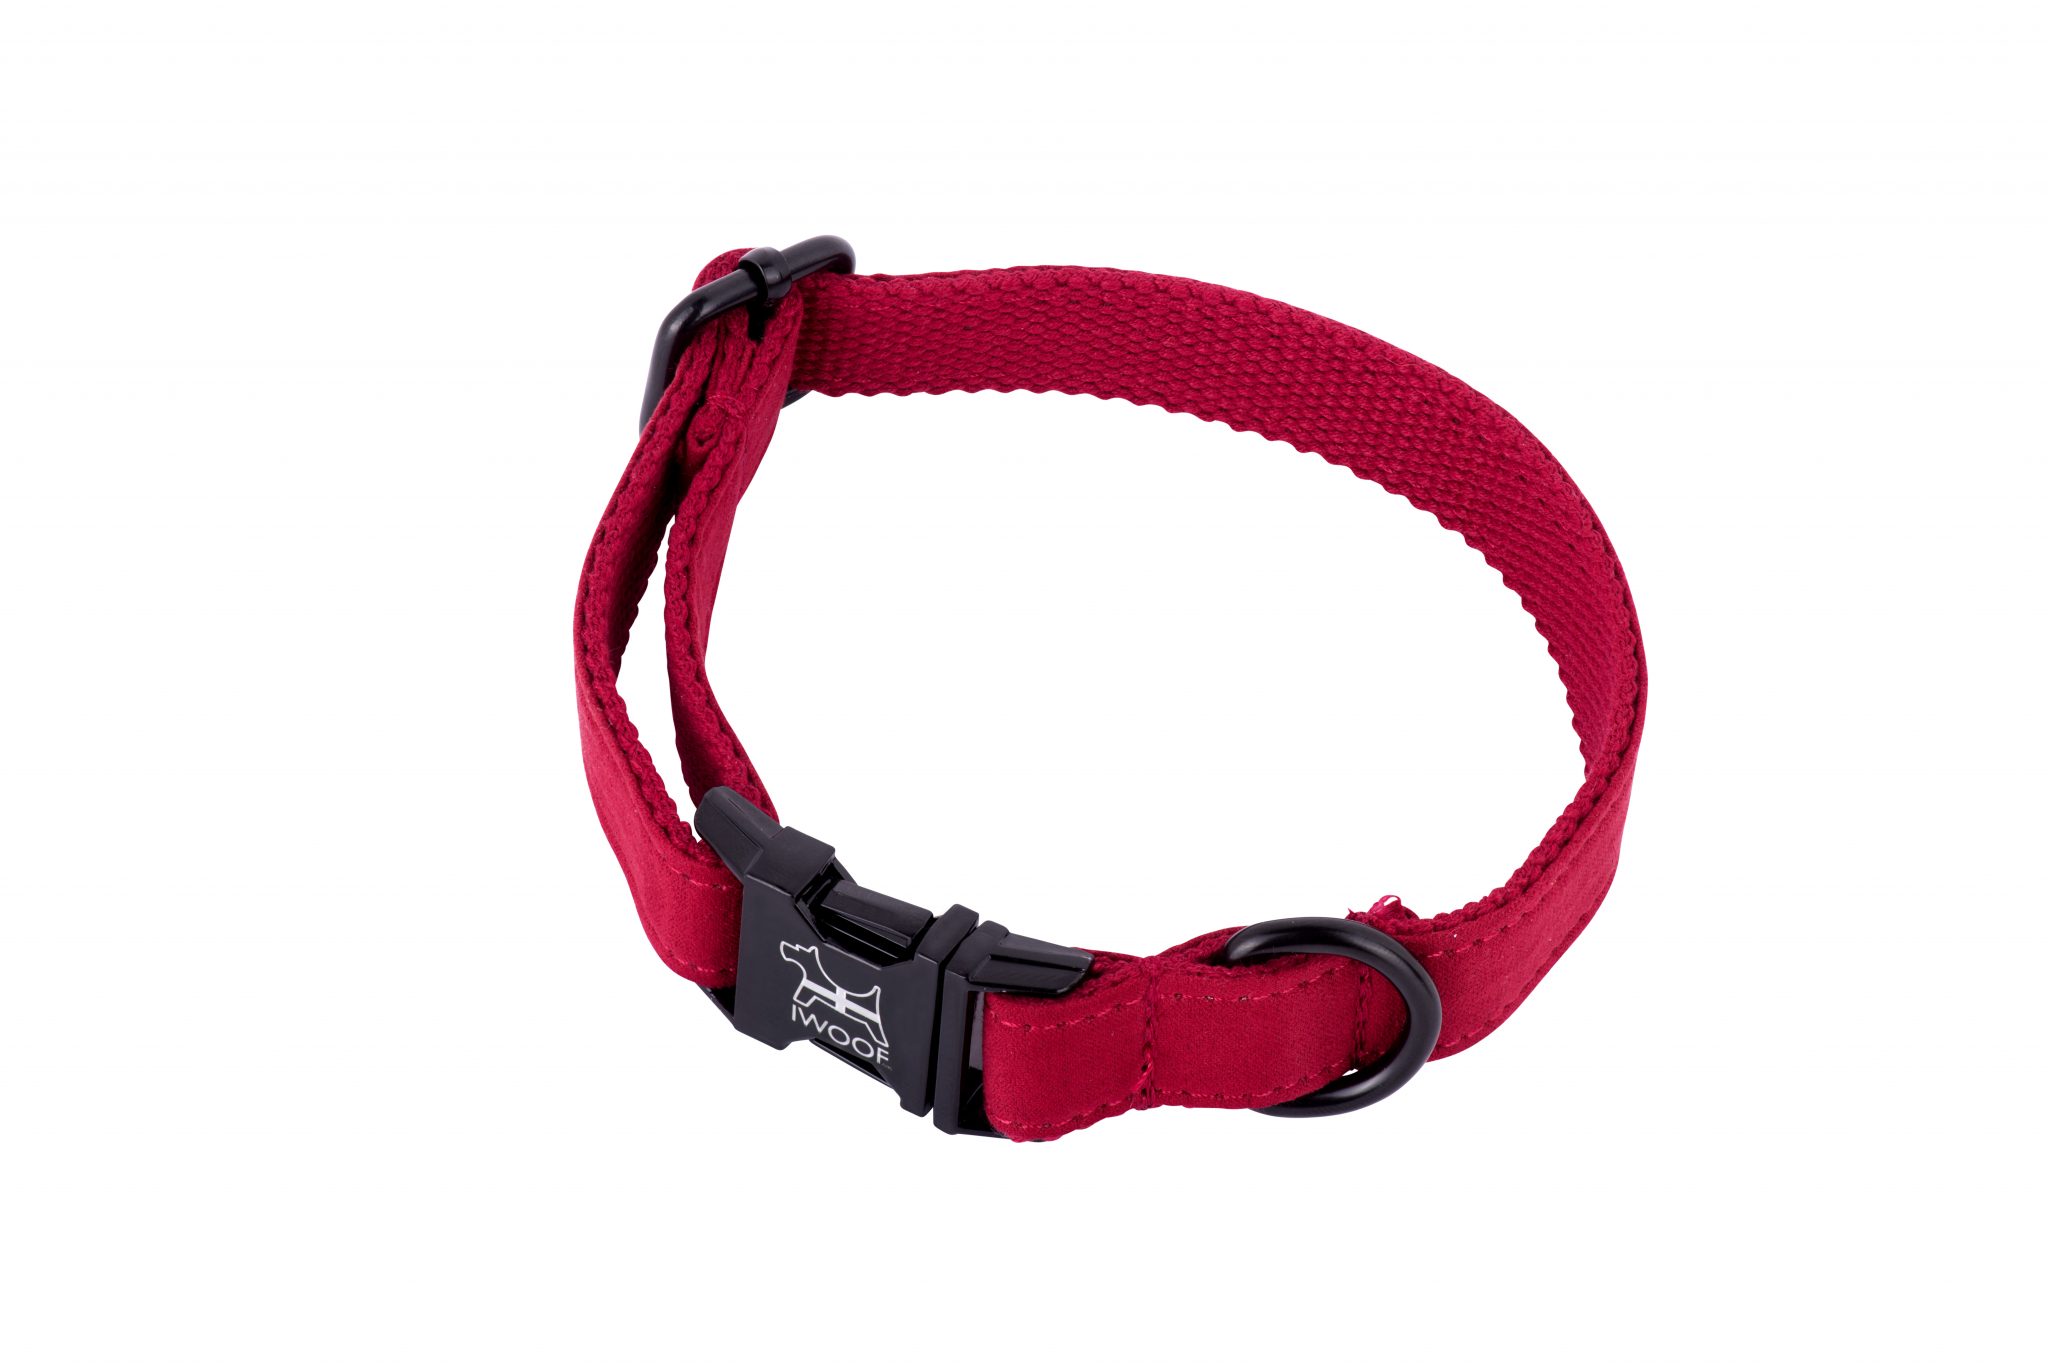 Cornish red designer dog collar by IWOOF with black fittings